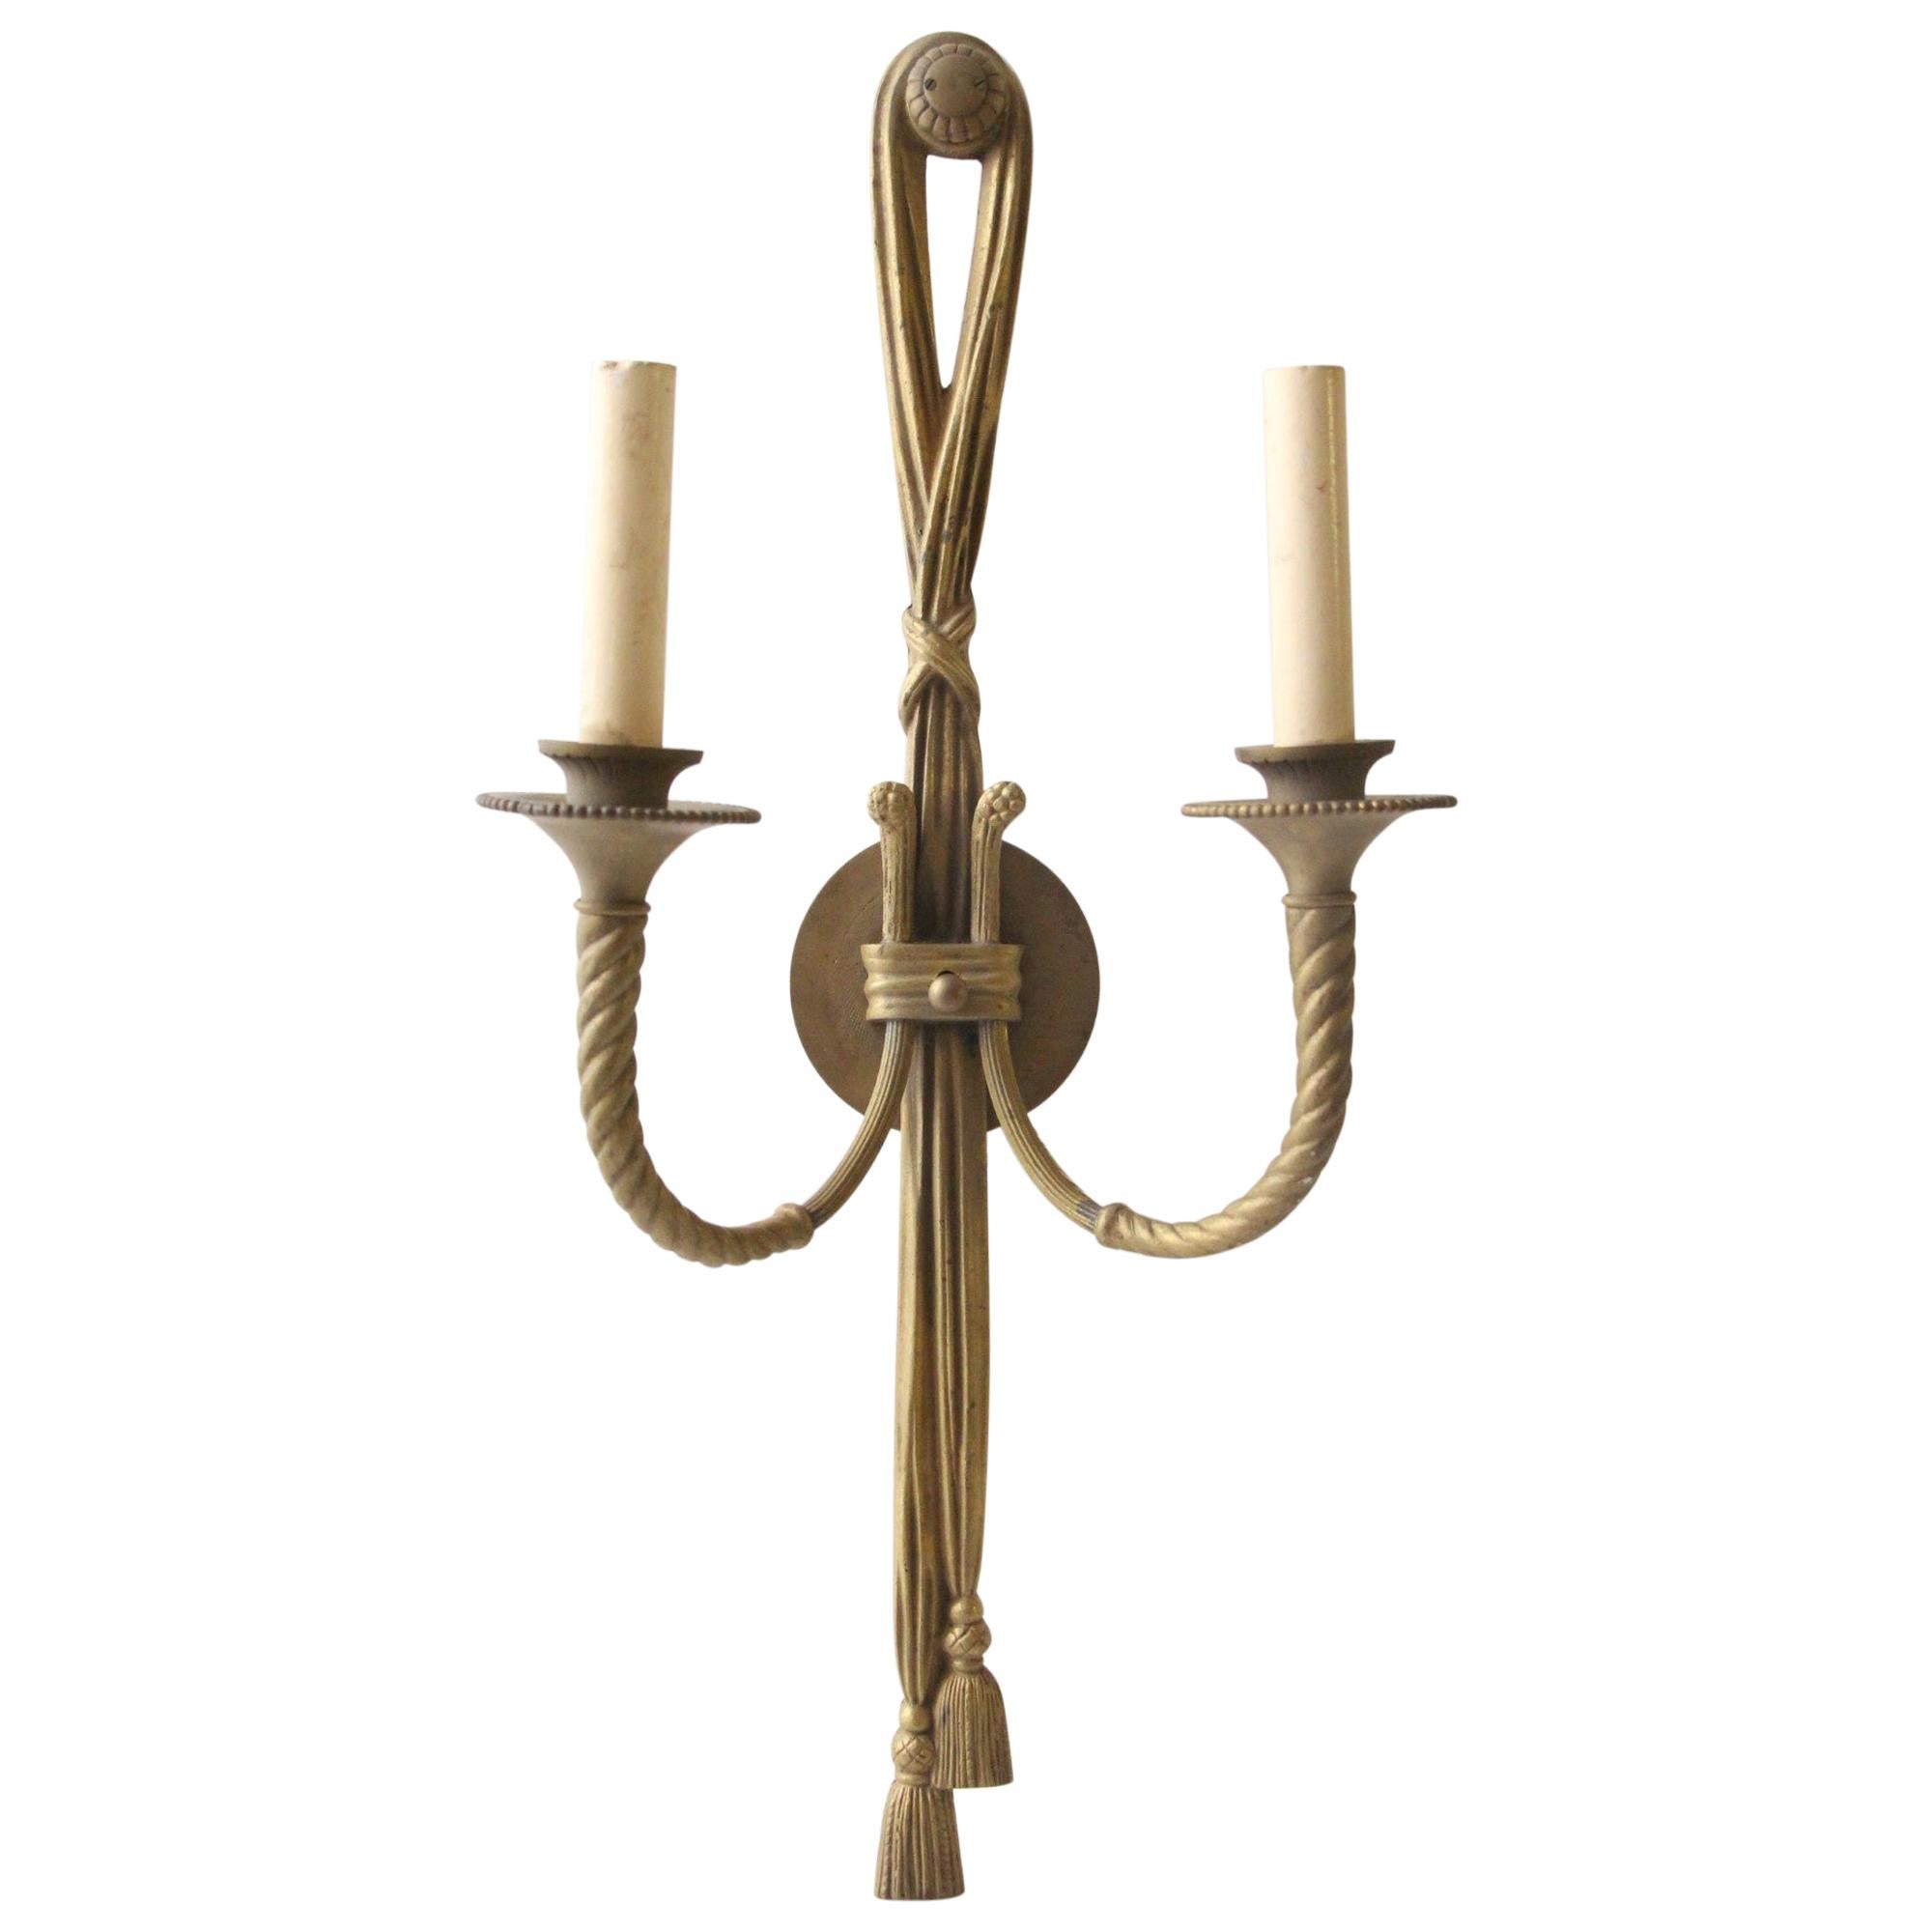 Tall and elegant neoclassical style rope twisted sconce with a brass construction and a tassel on the end. Price includes restoration. This can be seen at our 400 Gilligan St location in Scranton. PA.